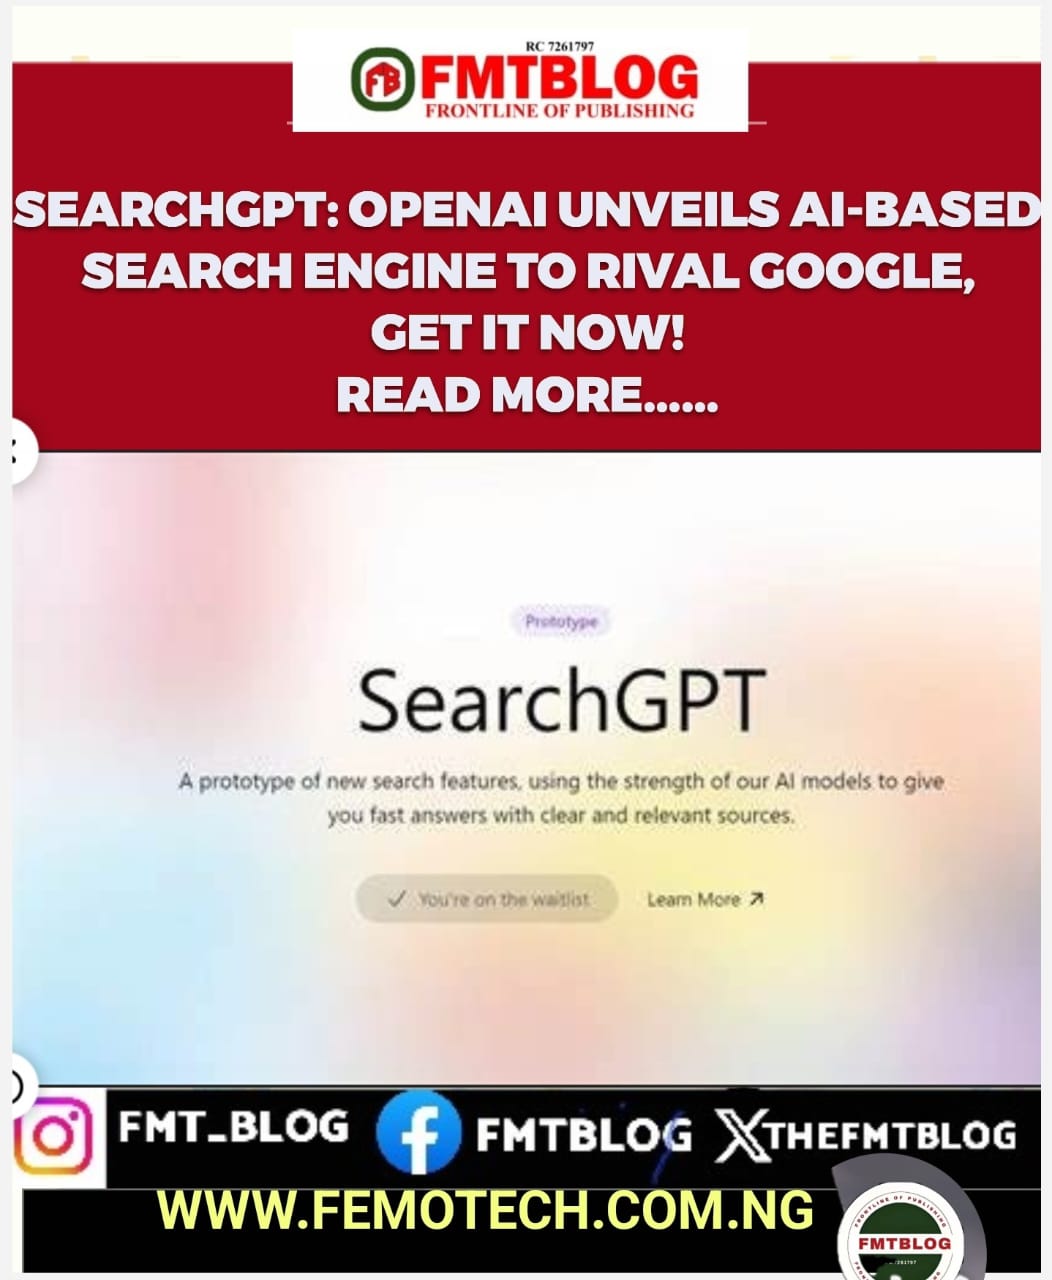 SearchGPT: Openai Unveils AI-Based Search Engine To Rival Google, Get It Now